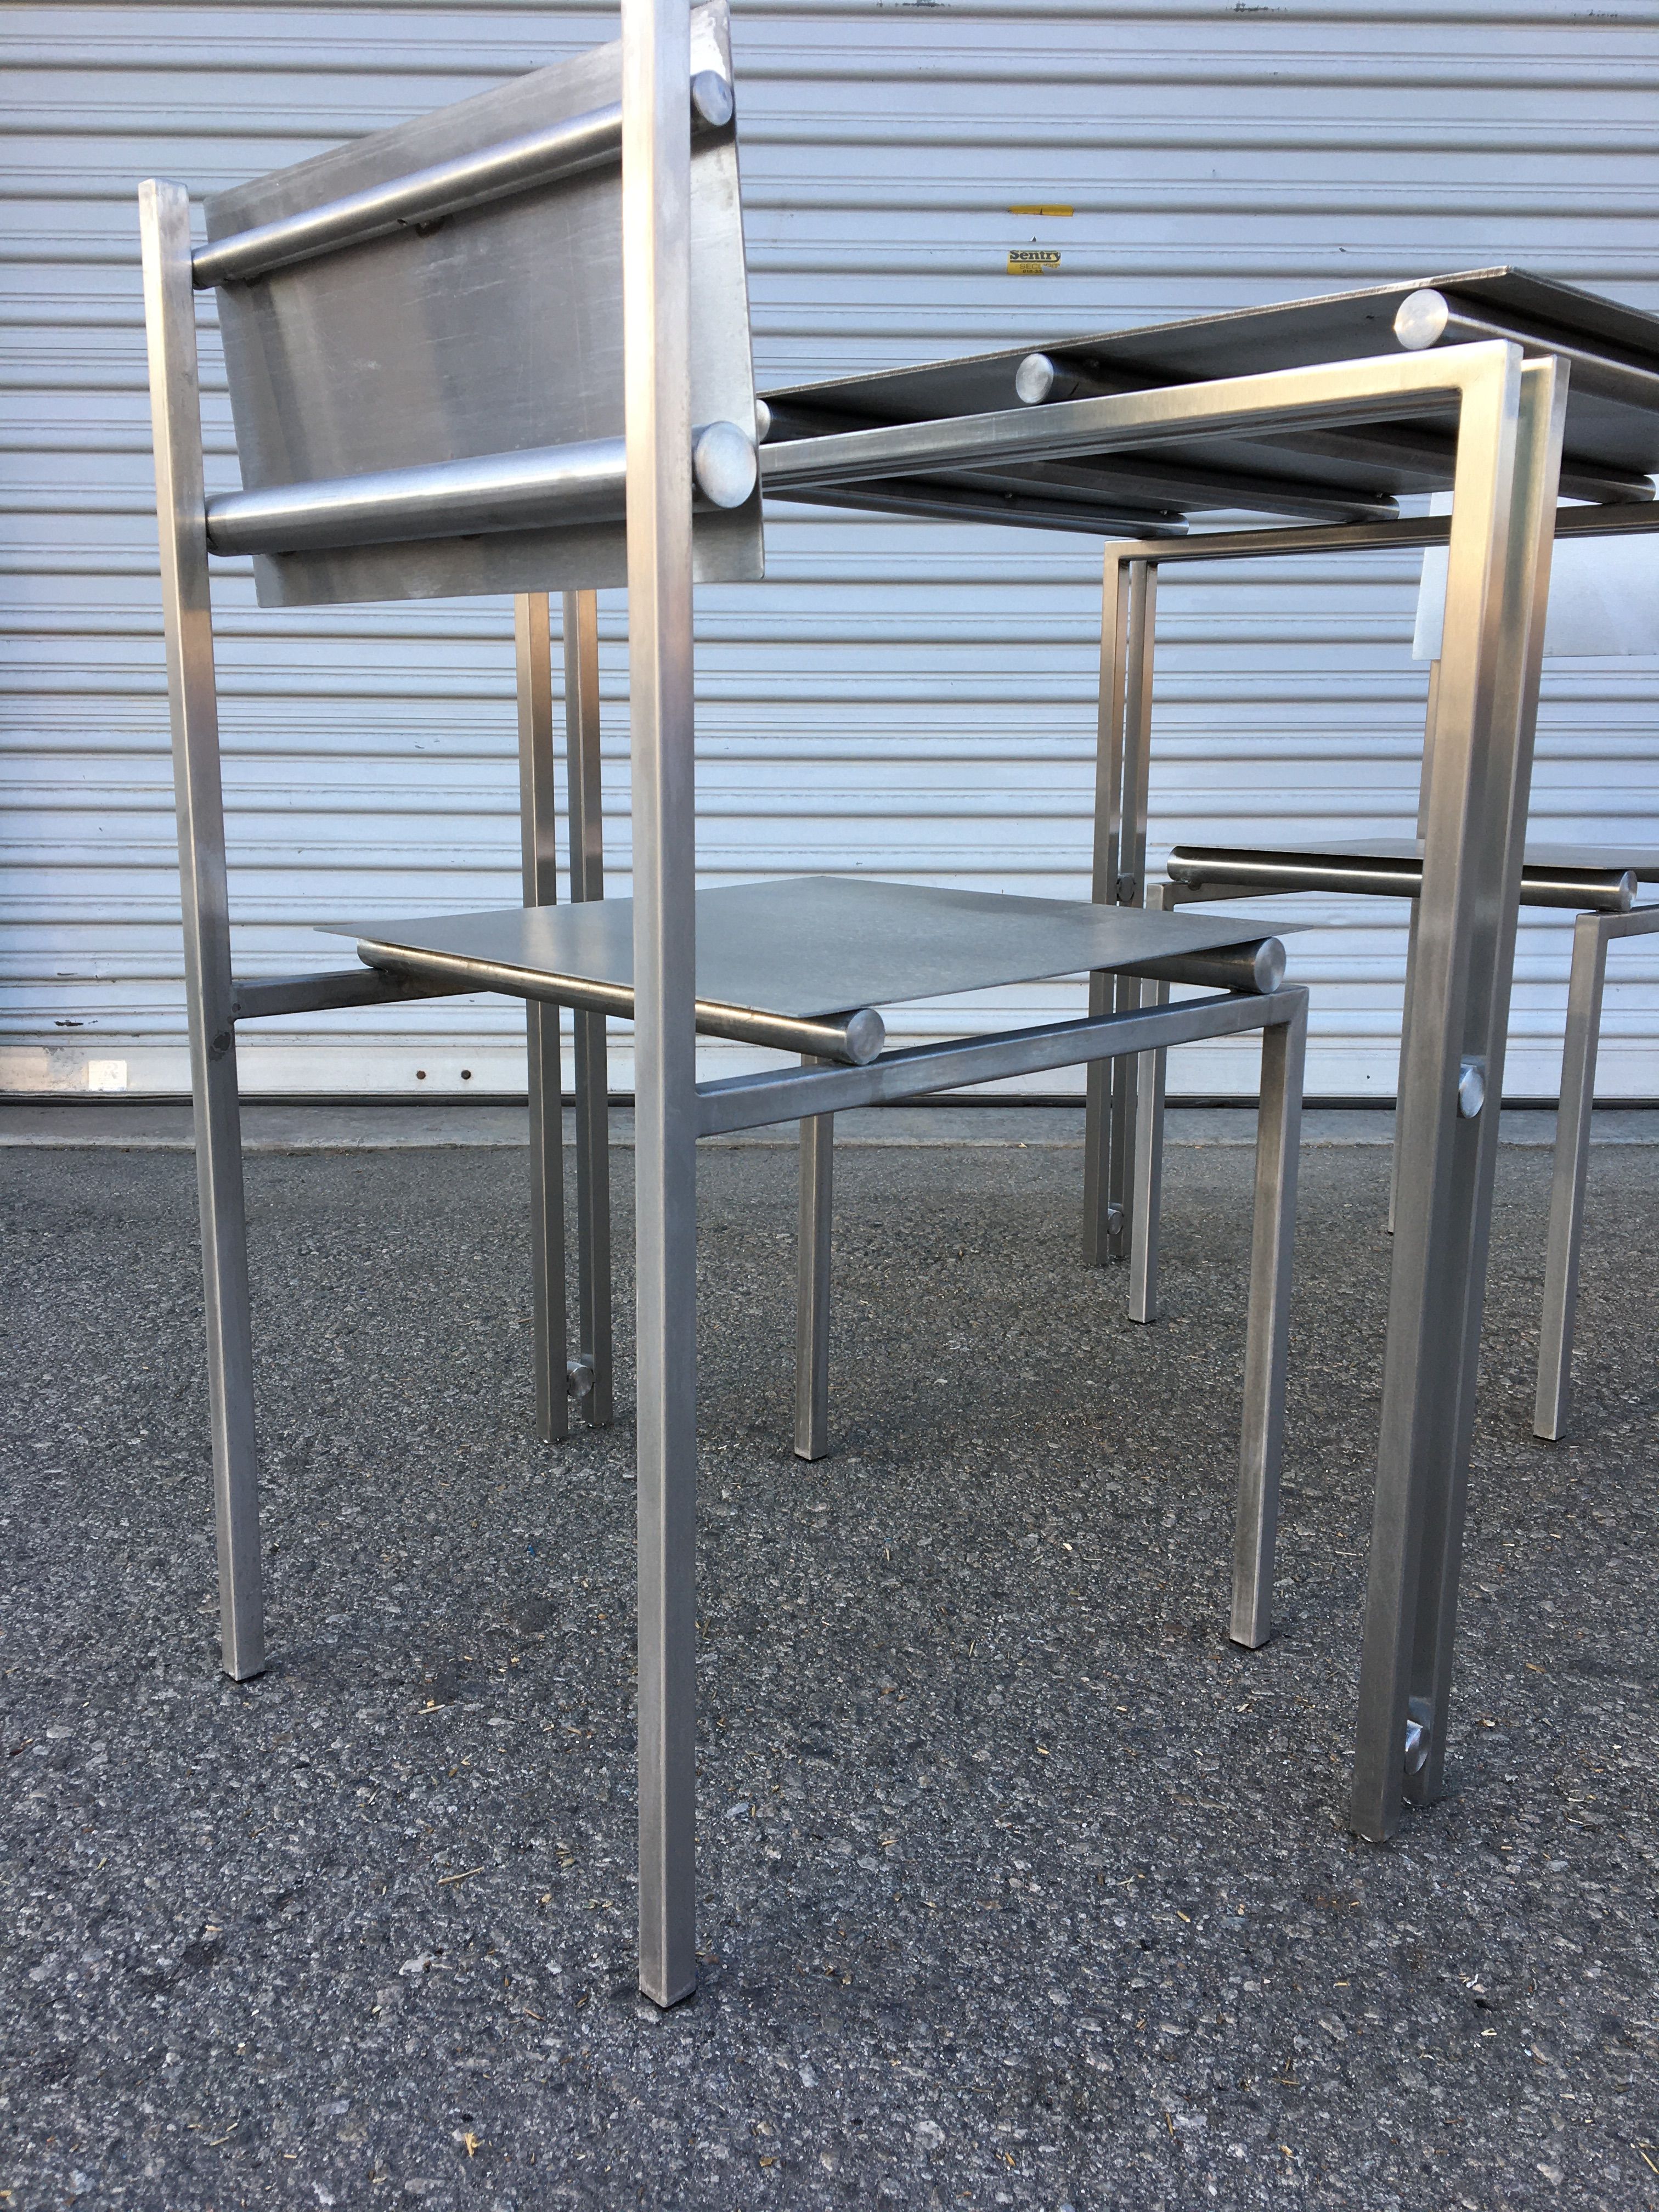  Stainless Steel Suspension Set product image 4